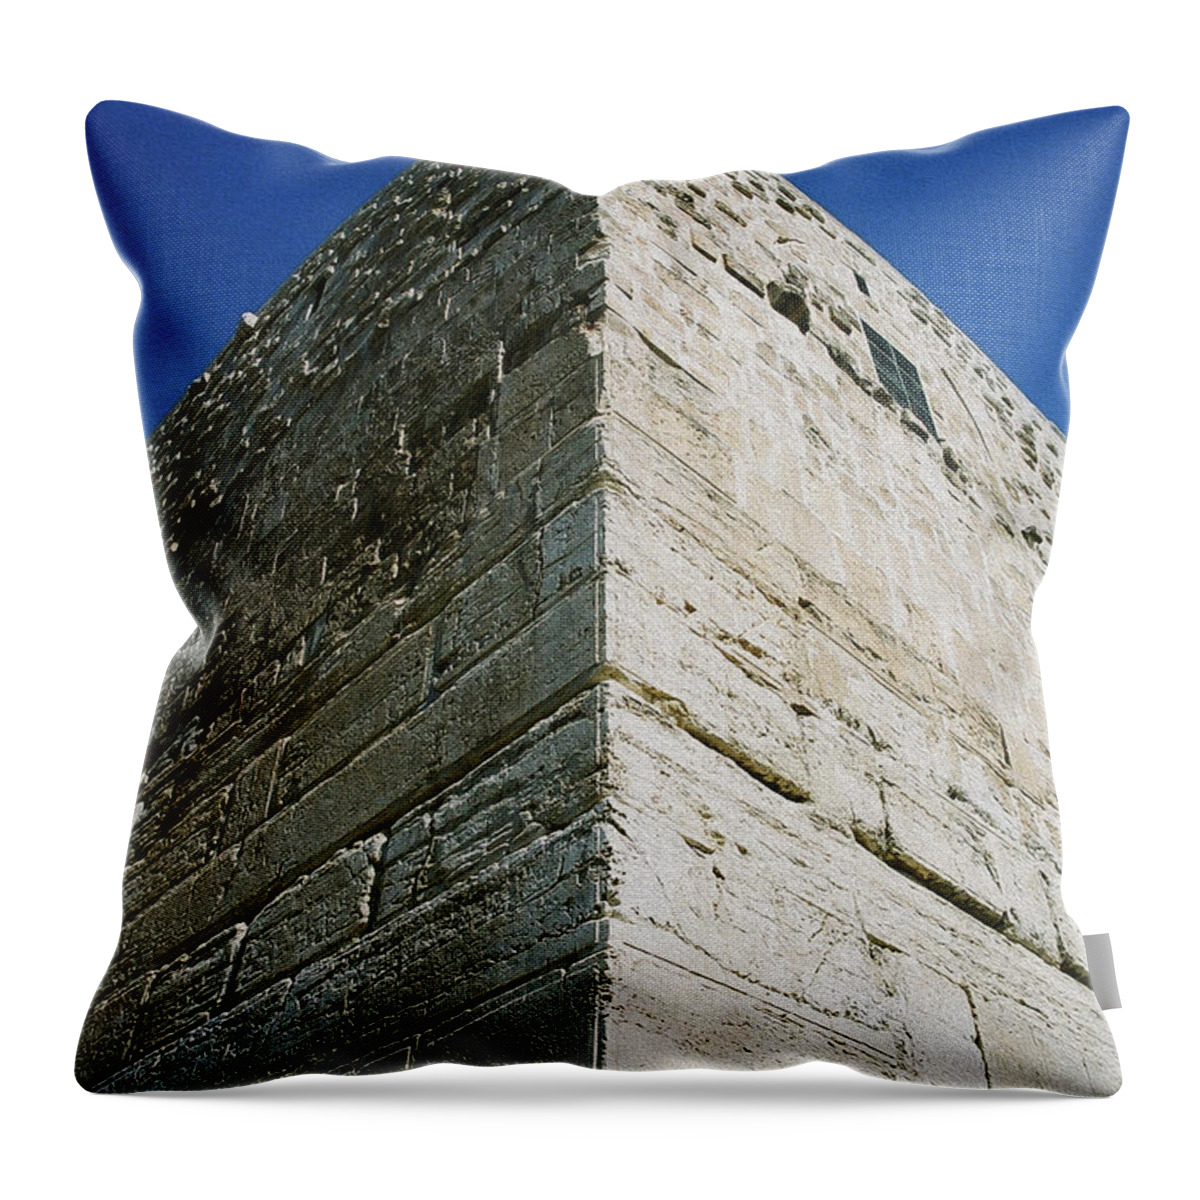 Ancient Throw Pillow featuring the photograph Temple Cornerstone by Constance Woods